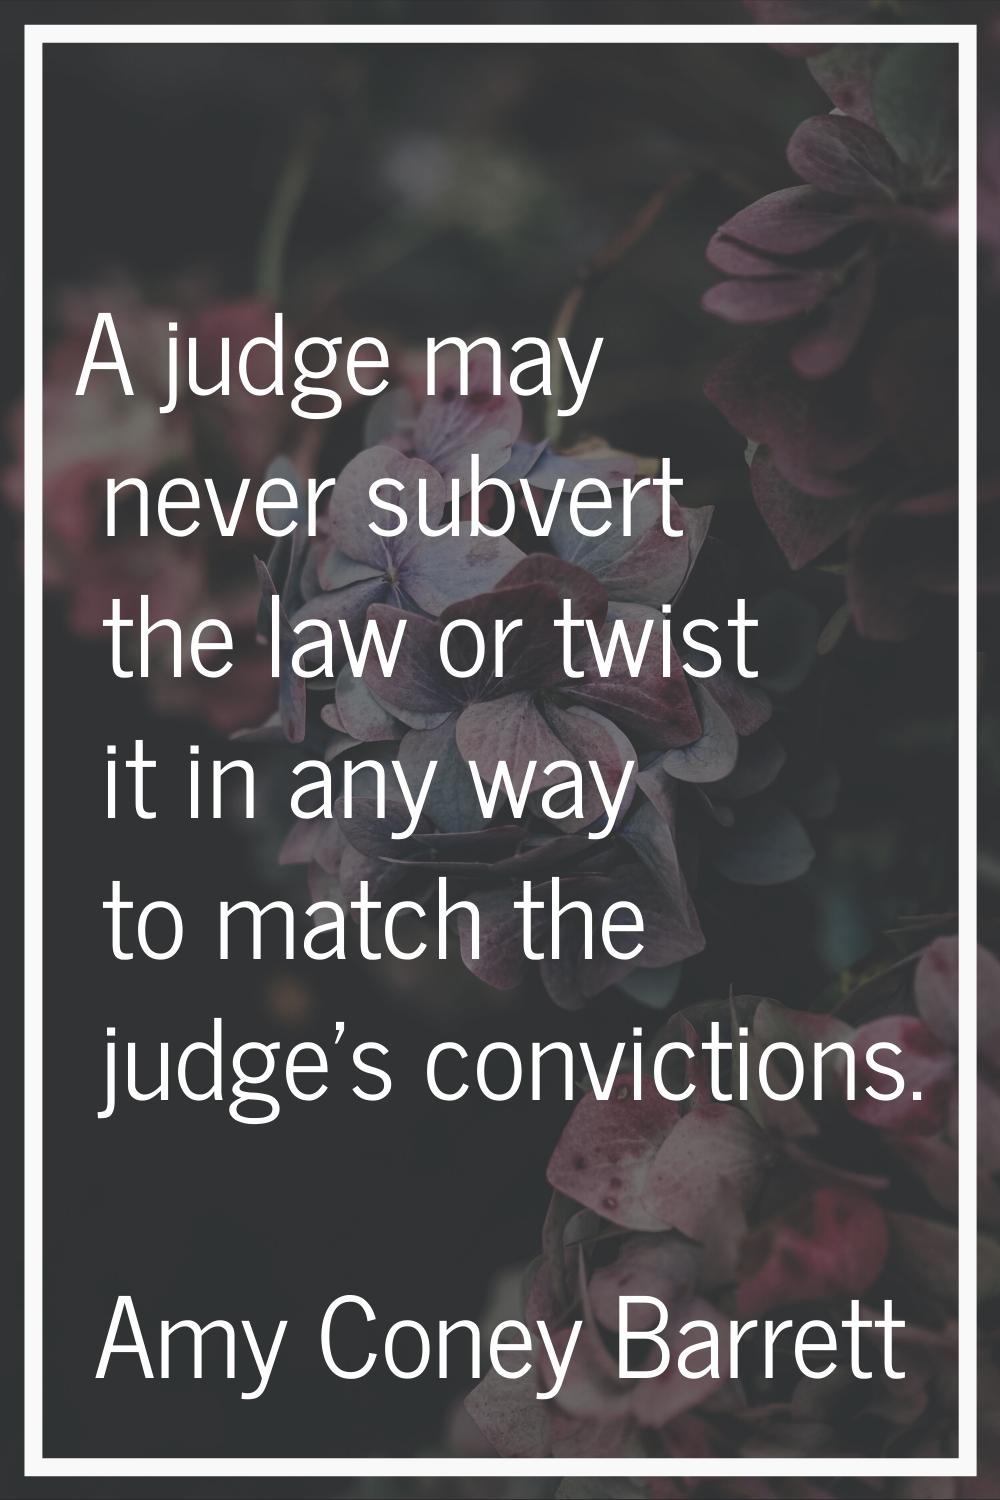 A judge may never subvert the law or twist it in any way to match the judge's convictions.